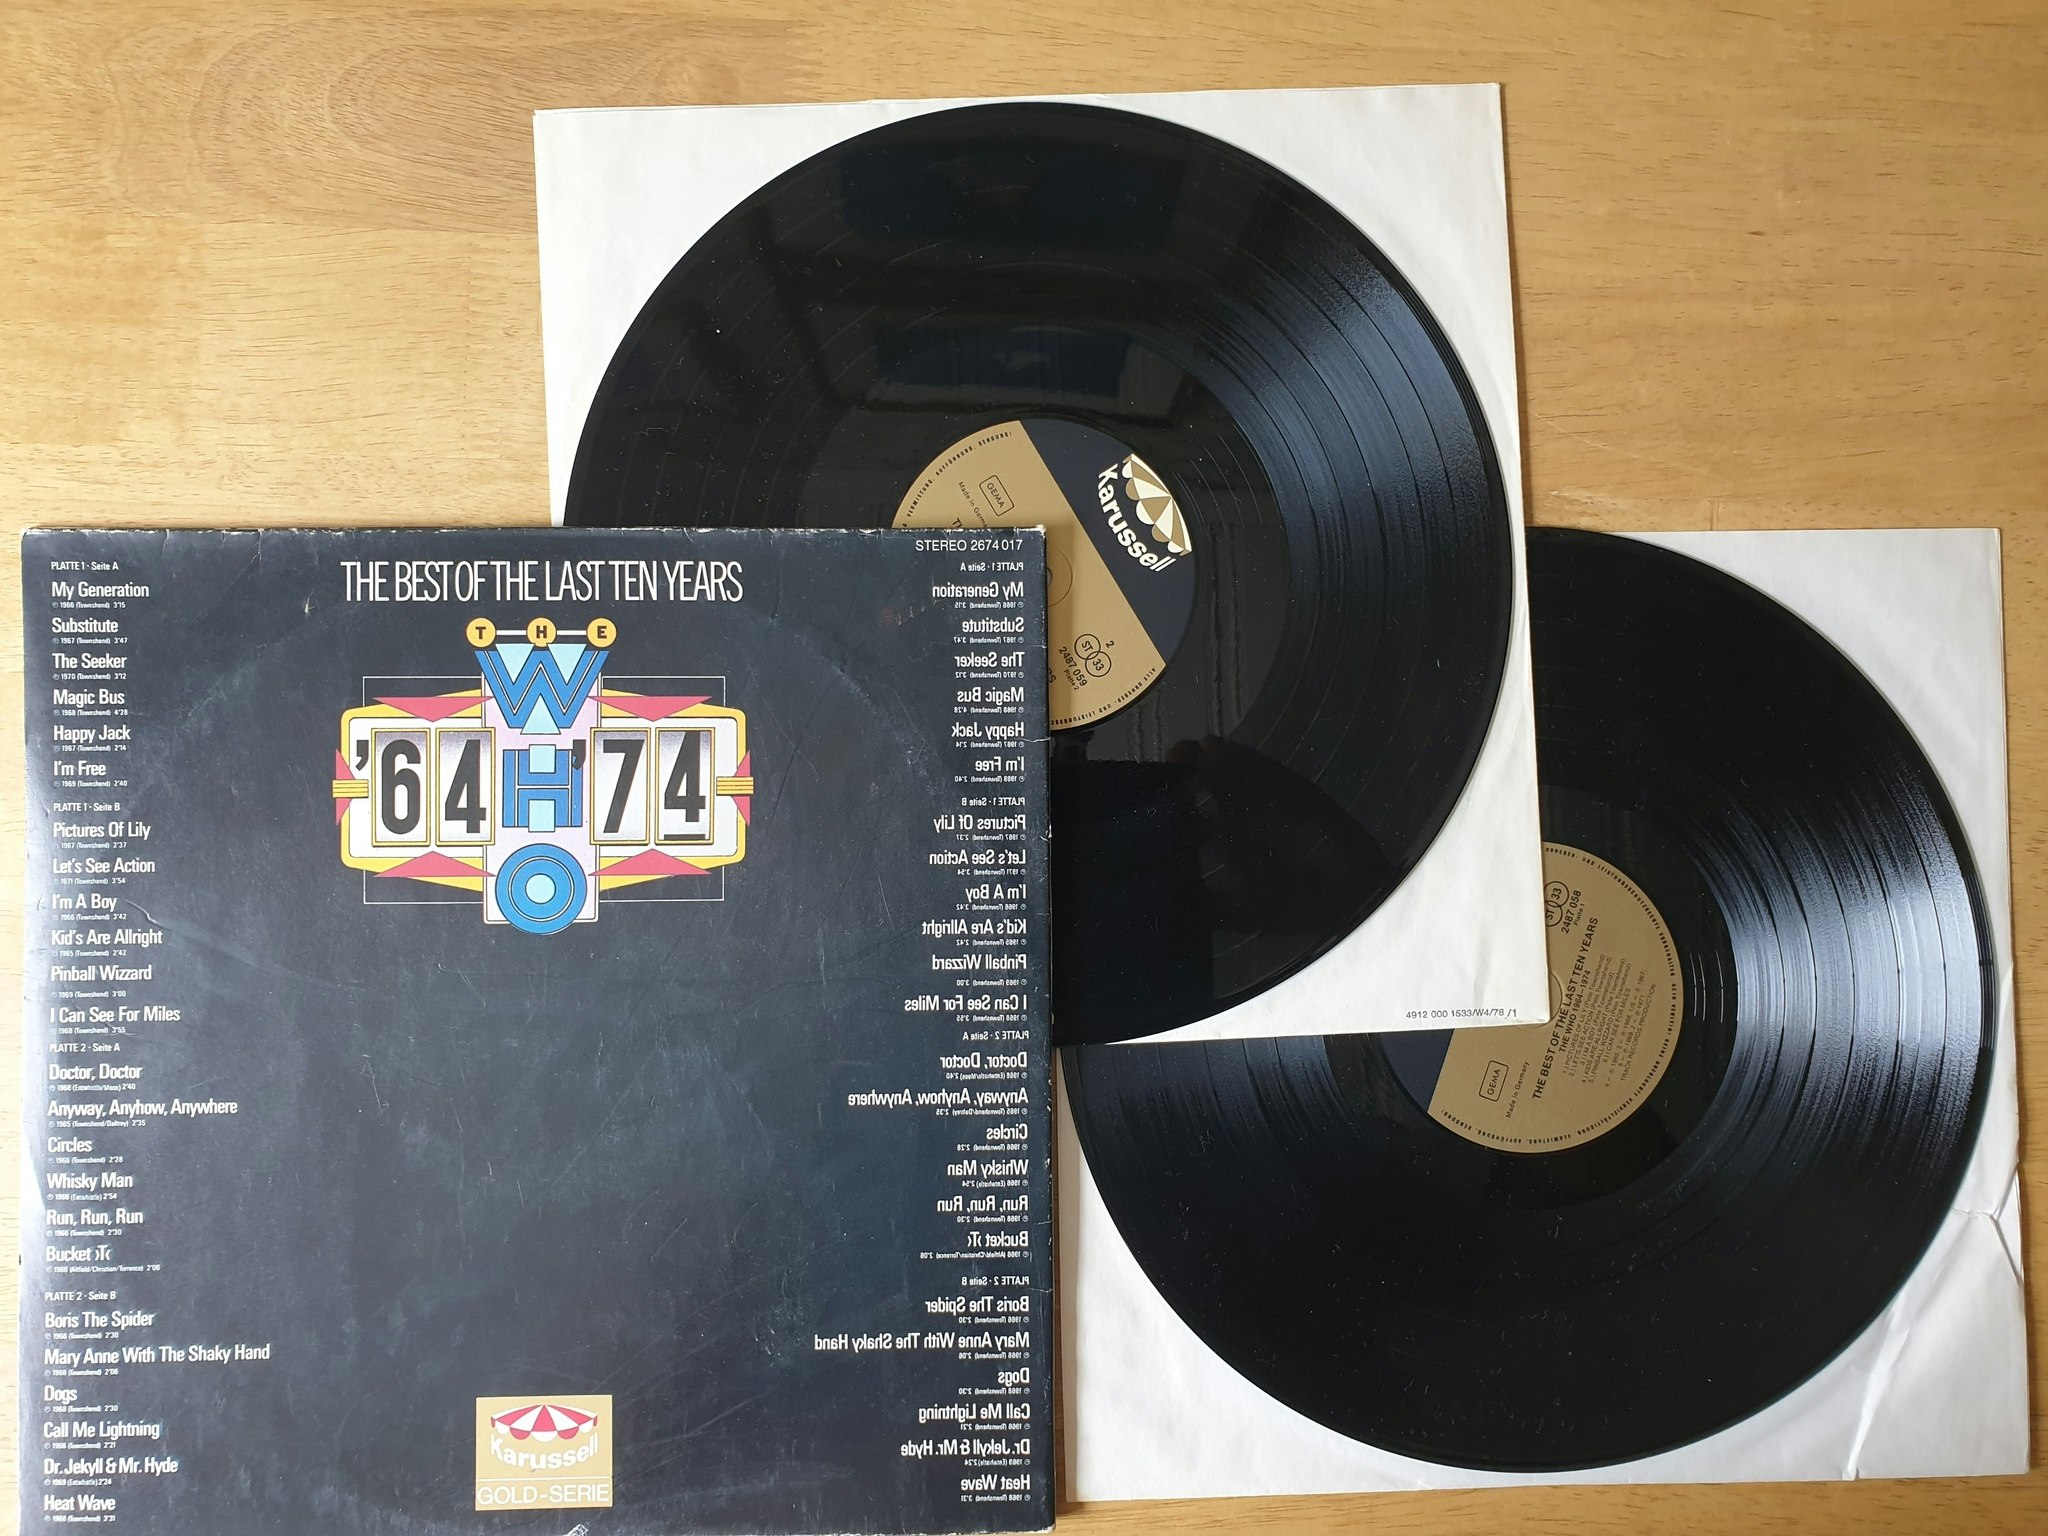 The Who, The best of the last ten years. Vinyl 2LP